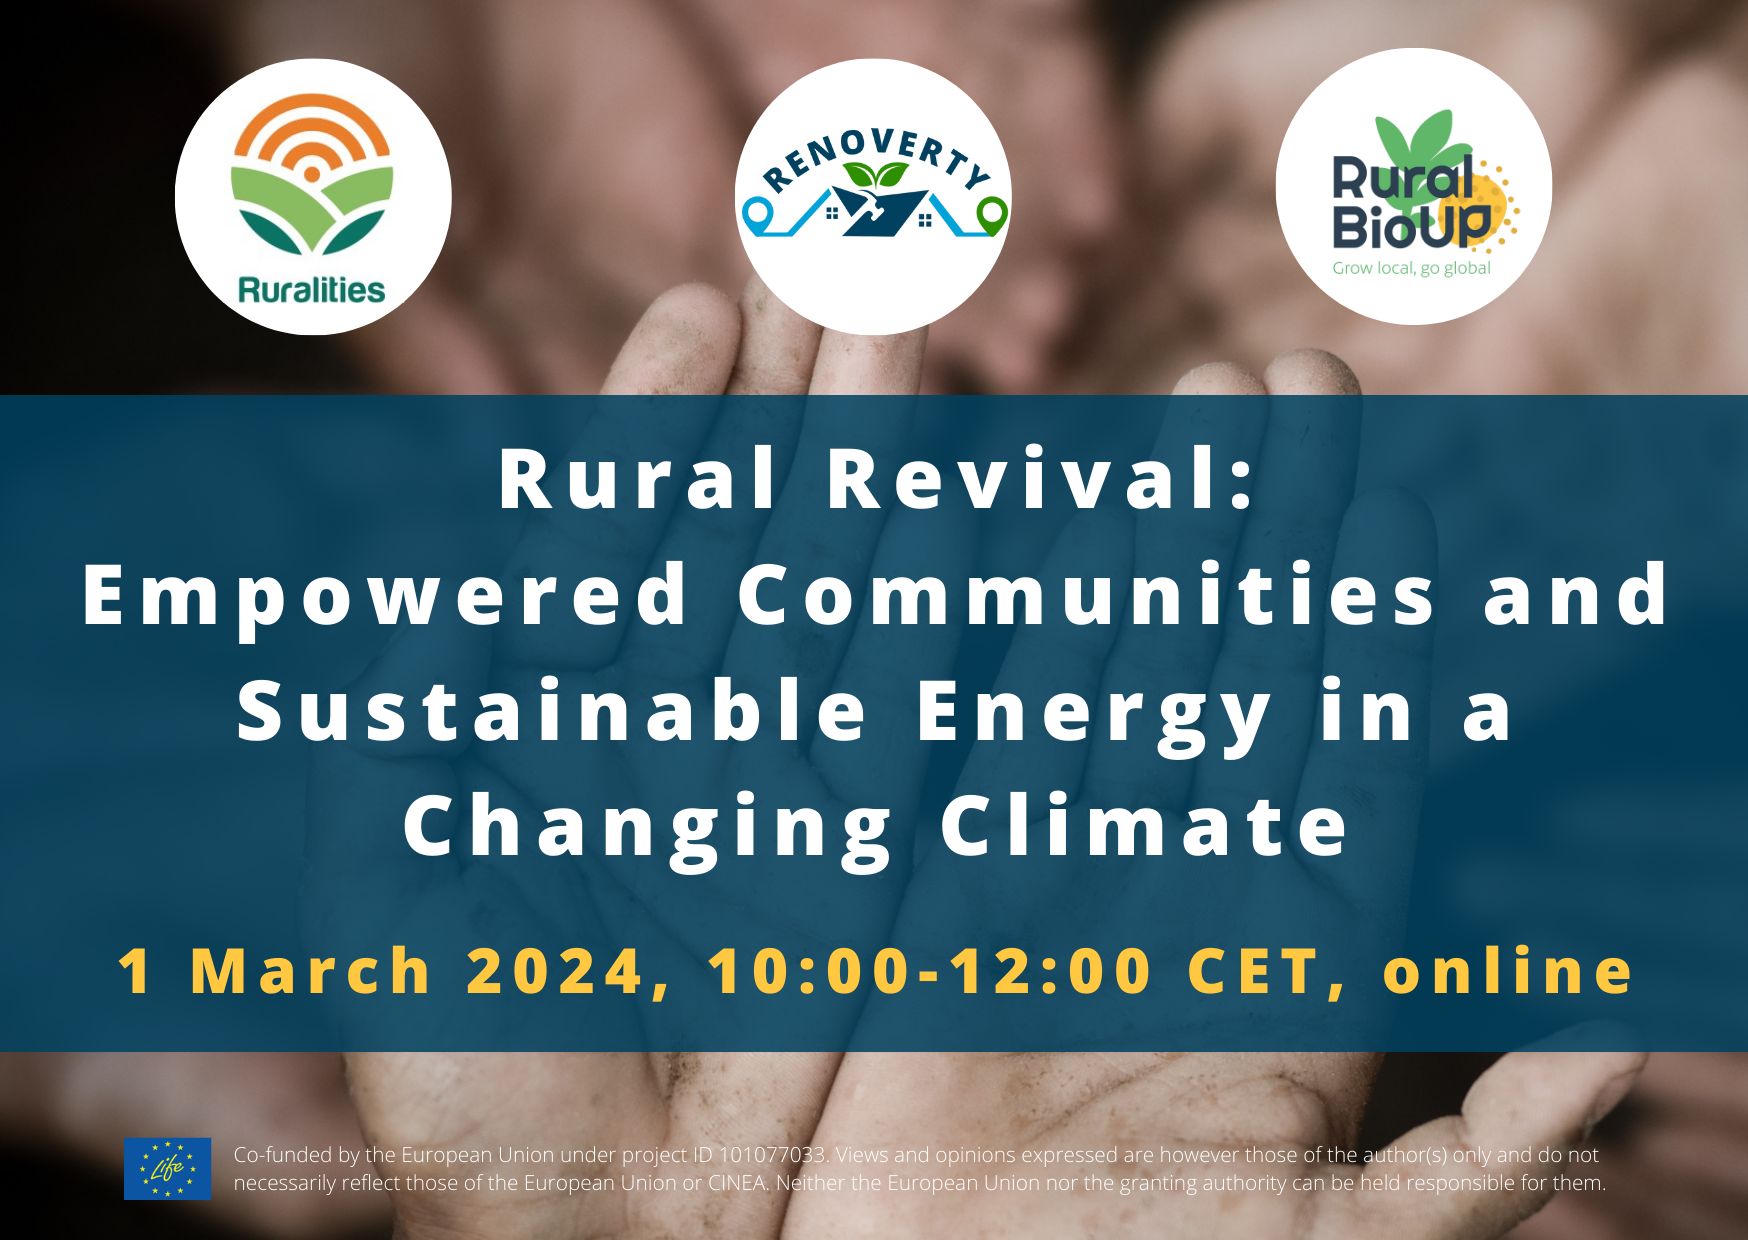 Upcoming webinar: “Rural Revival: Empowered Communities and Sustainable Energy in a Changing Climate”